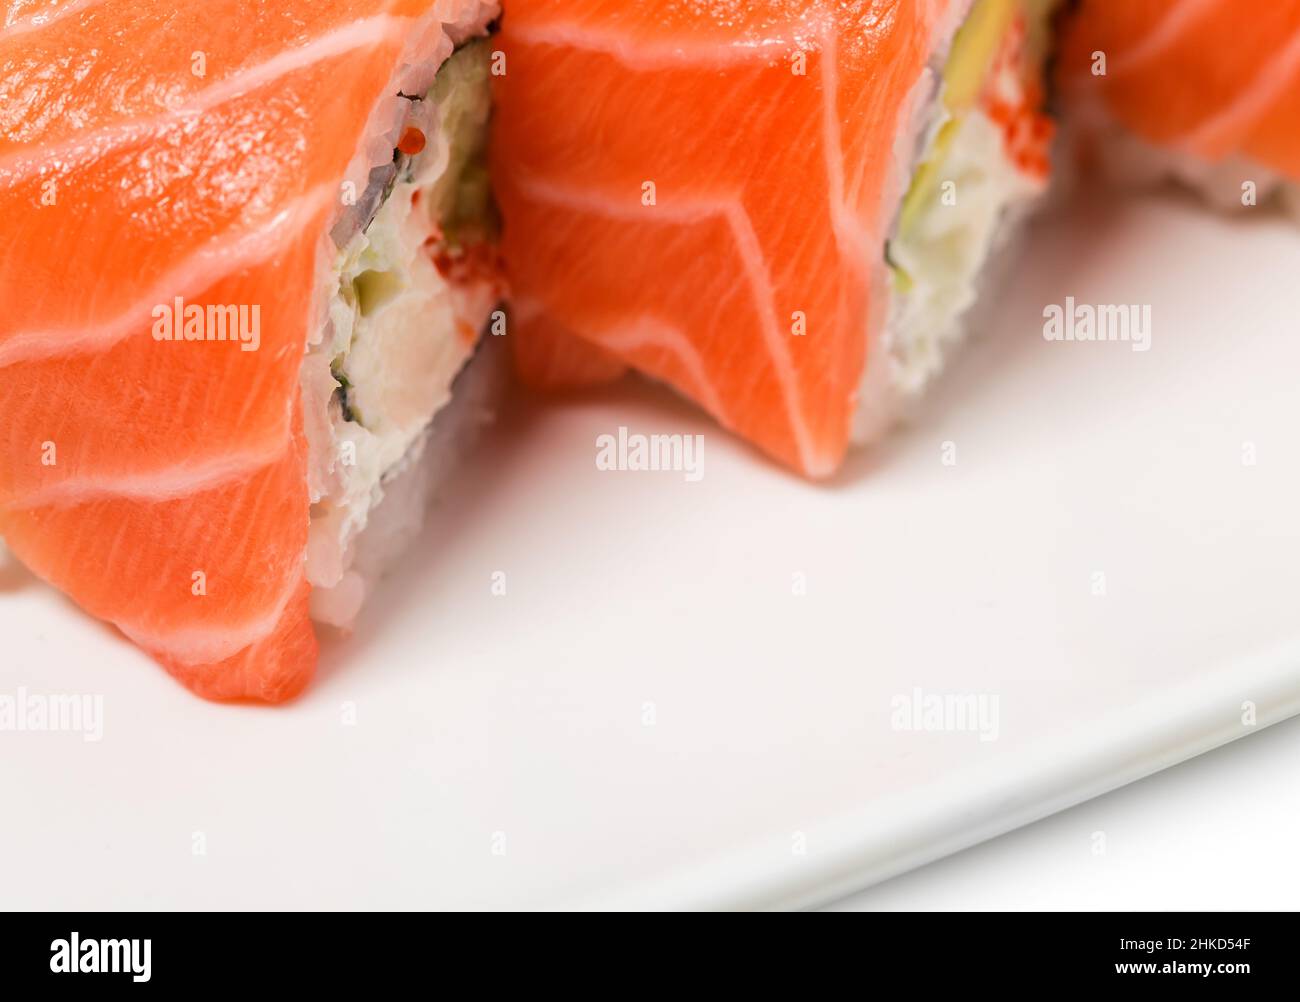 Uramaki salmon roll with scallops. Can be used as a background. Stock Photo